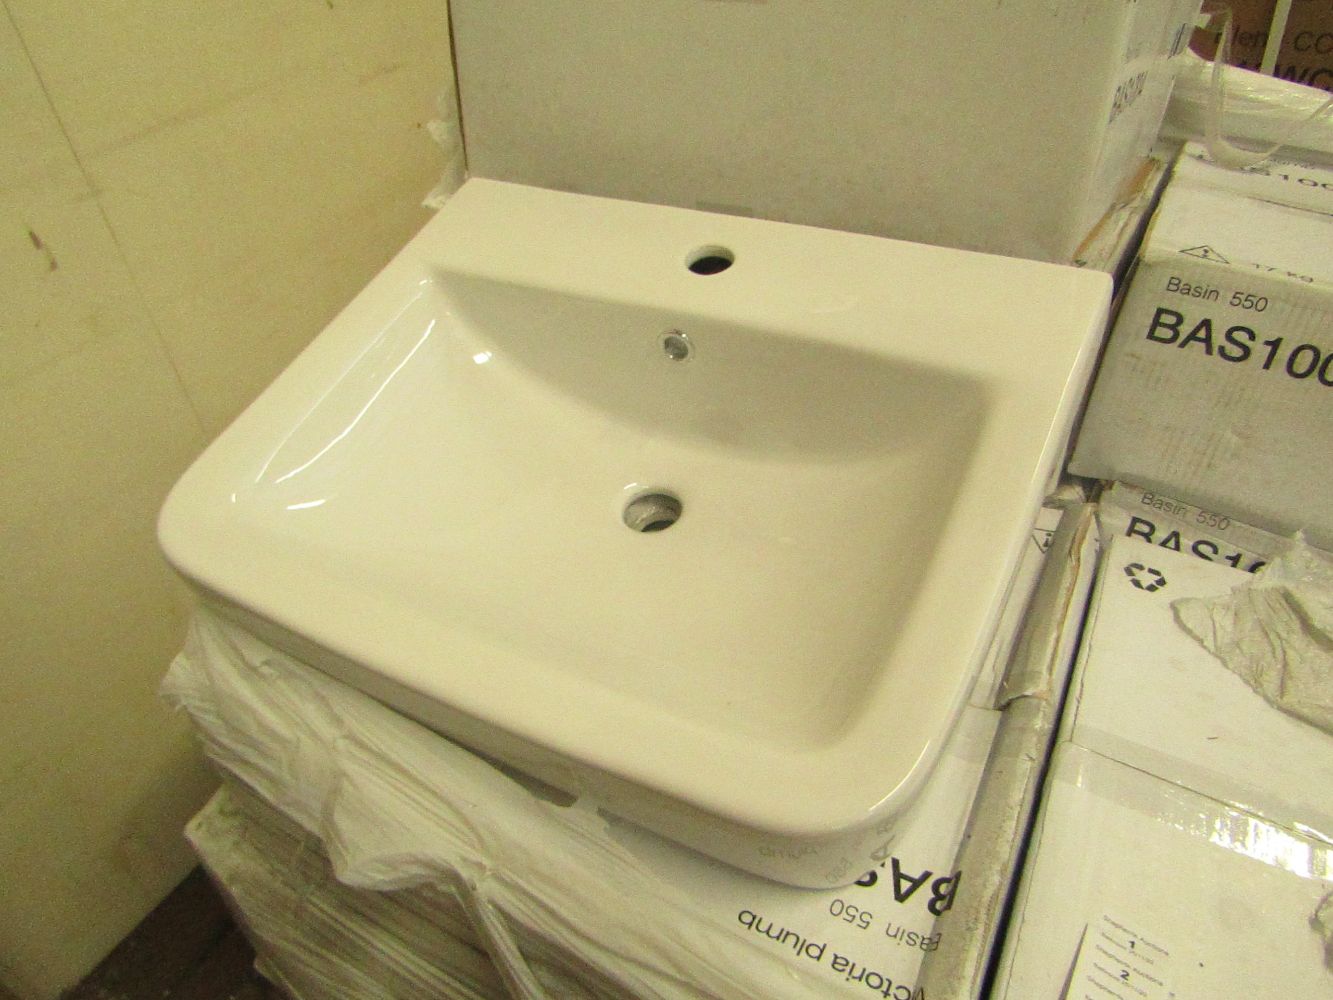 bathroom stock including; Johnson Tiles, toilet pans, bathroom accessories and much more!